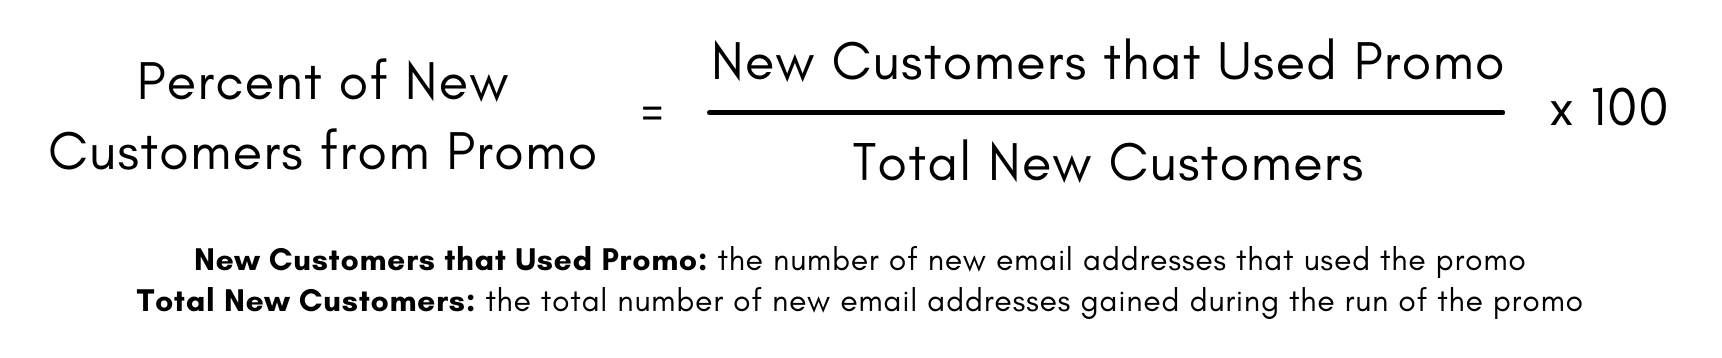 Formula for the Percent of New Customers from a Promotion: number of new email addresses the used the promo divided by the total number of new email addresses in the promo time period, times 100.